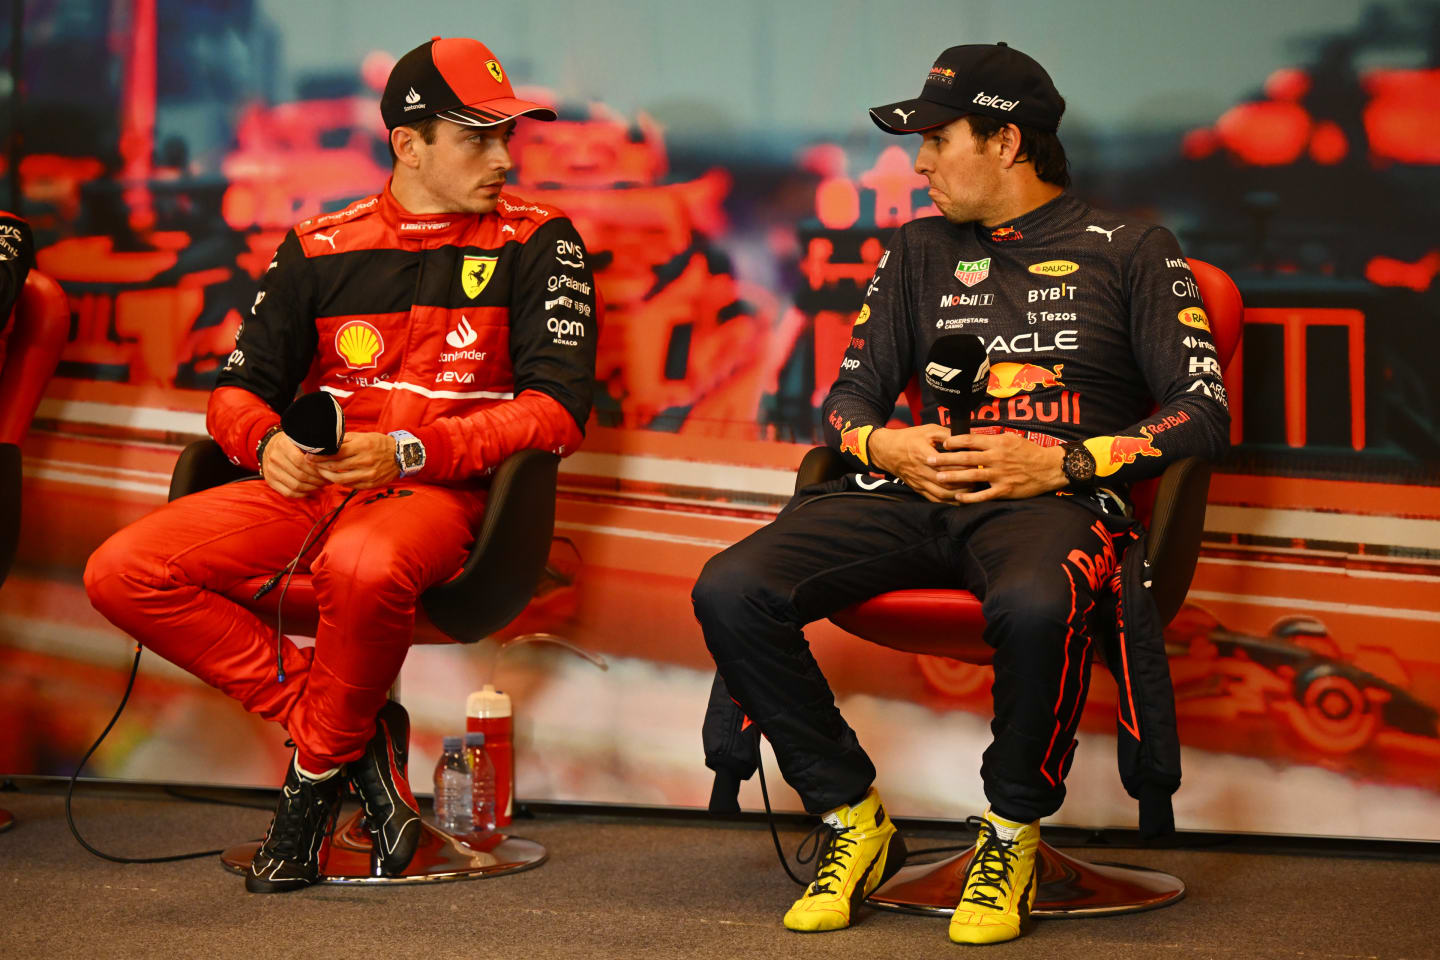 MONTE-CARLO, MONACO - MAY 28: Pole position qualifier Charles Leclerc of Monaco and Ferrari and Third placed qualifier Sergio Perez of Mexico and Oracle Red Bull Racing talk in the press conference after qualifying ahead of the F1 Grand Prix of Monaco at Circuit de Monaco on May 28, 2022 in Monte-Carlo, Monaco. (Photo by Clive Mason/Getty Images)